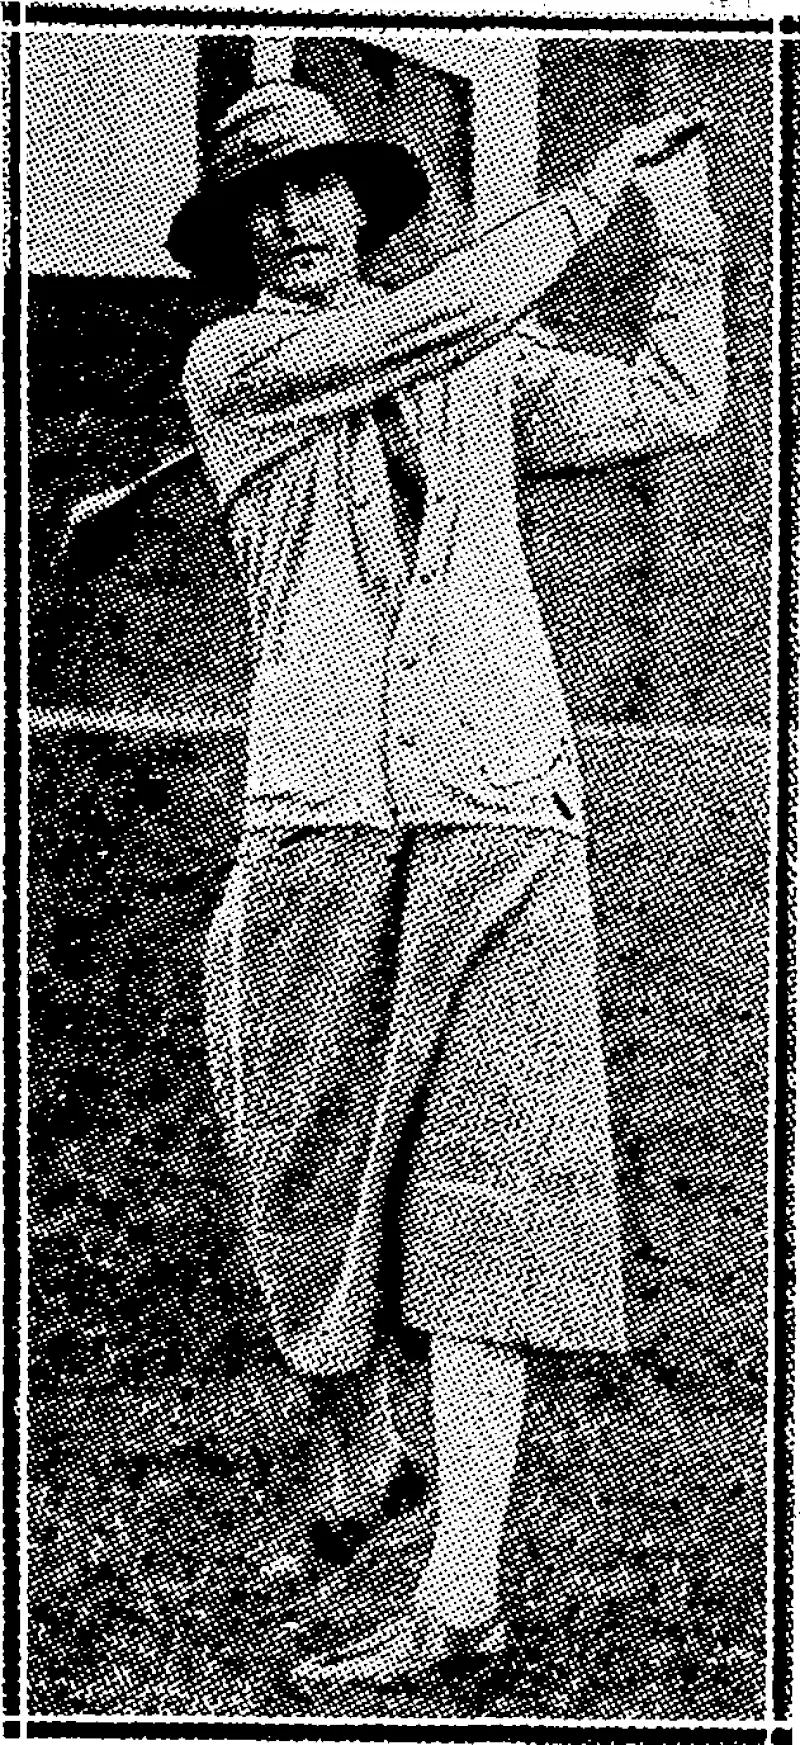 MISS MONA MACLEOD, . who defeated the holder of the, title, Miss Susie Tolhu'rst, in the quarterfinals of the. Australian women's golf championship. (Evening Post, 31 August 1932)